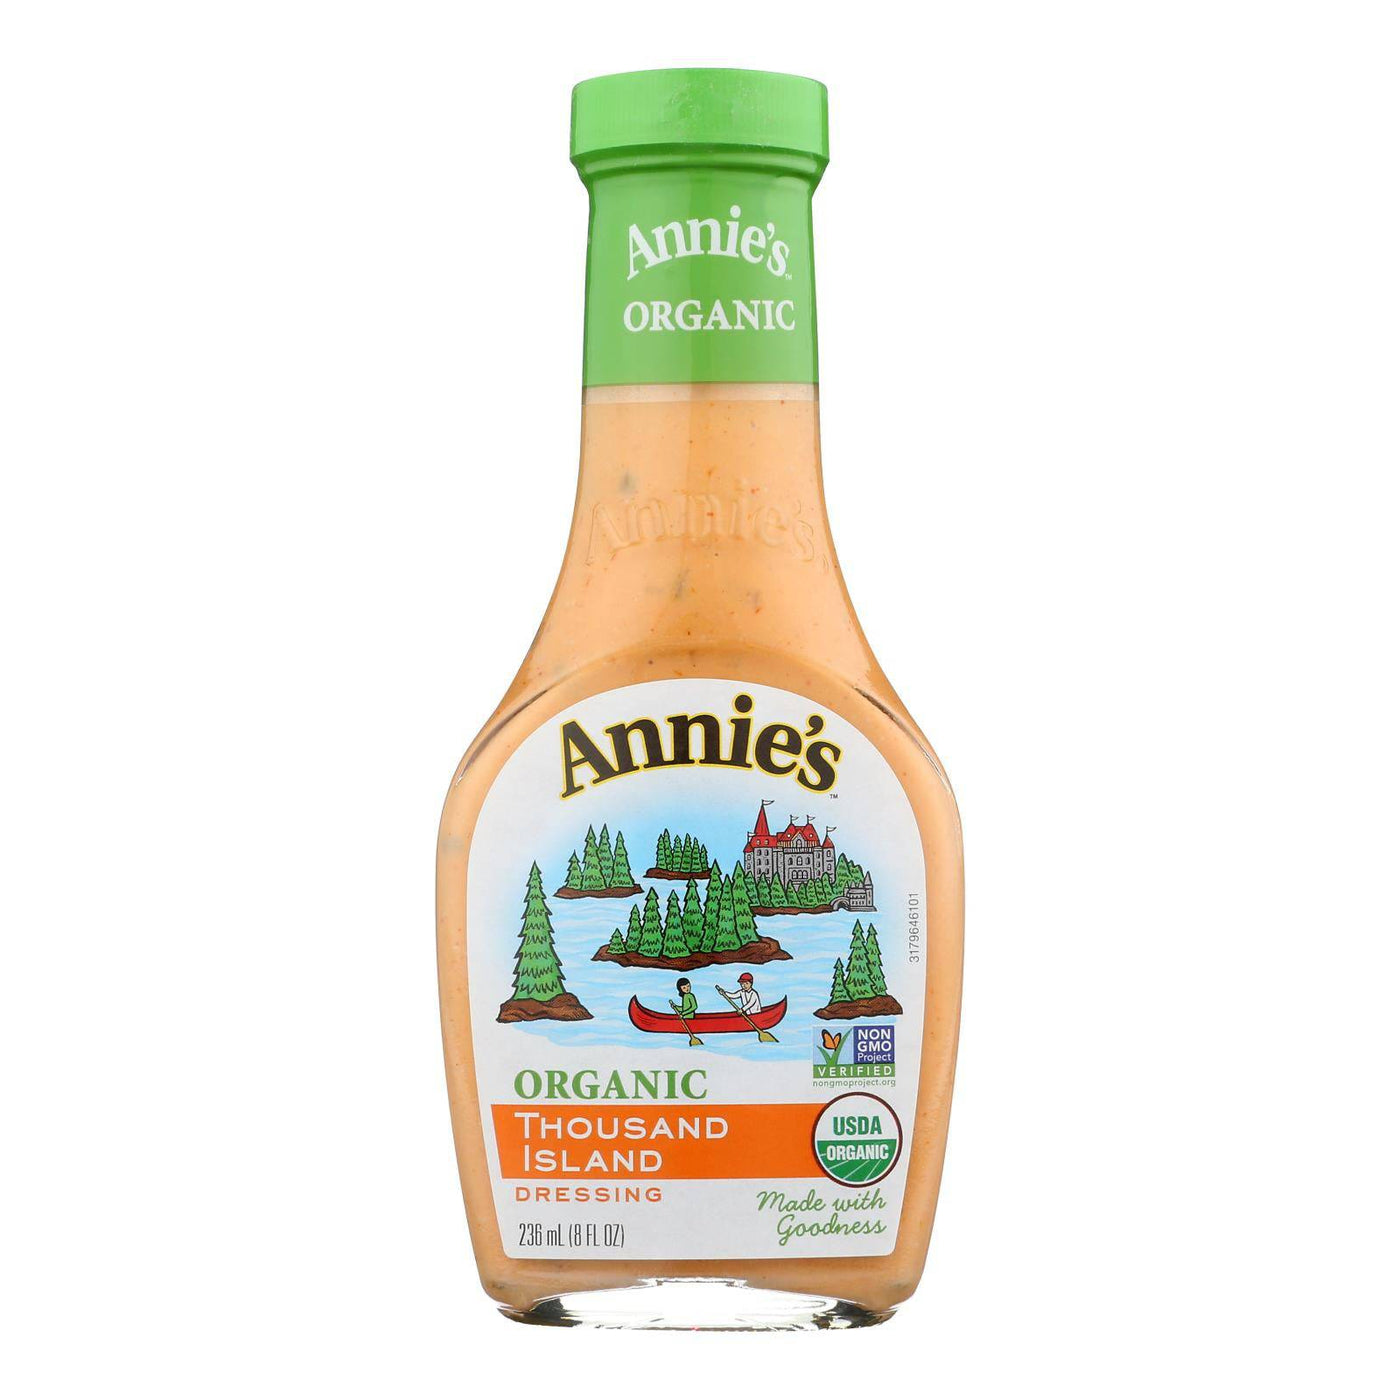 Buy Annie's Naturals Organic Dressing Thousand Island - Case Of 6 - 8 Fl Oz.  at OnlyNaturals.us